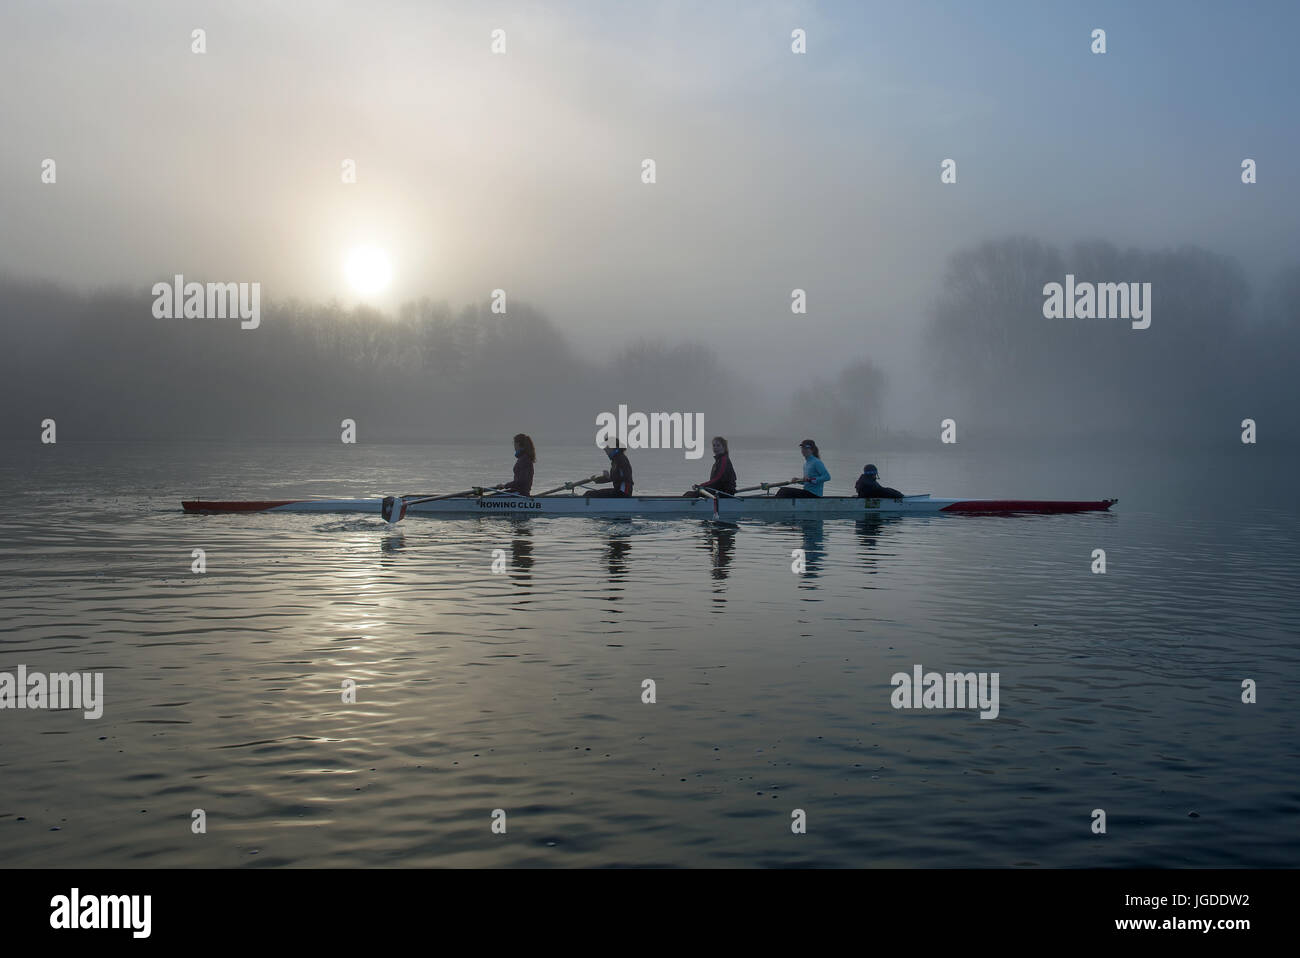 Rowers on a misty lake Stock Photo